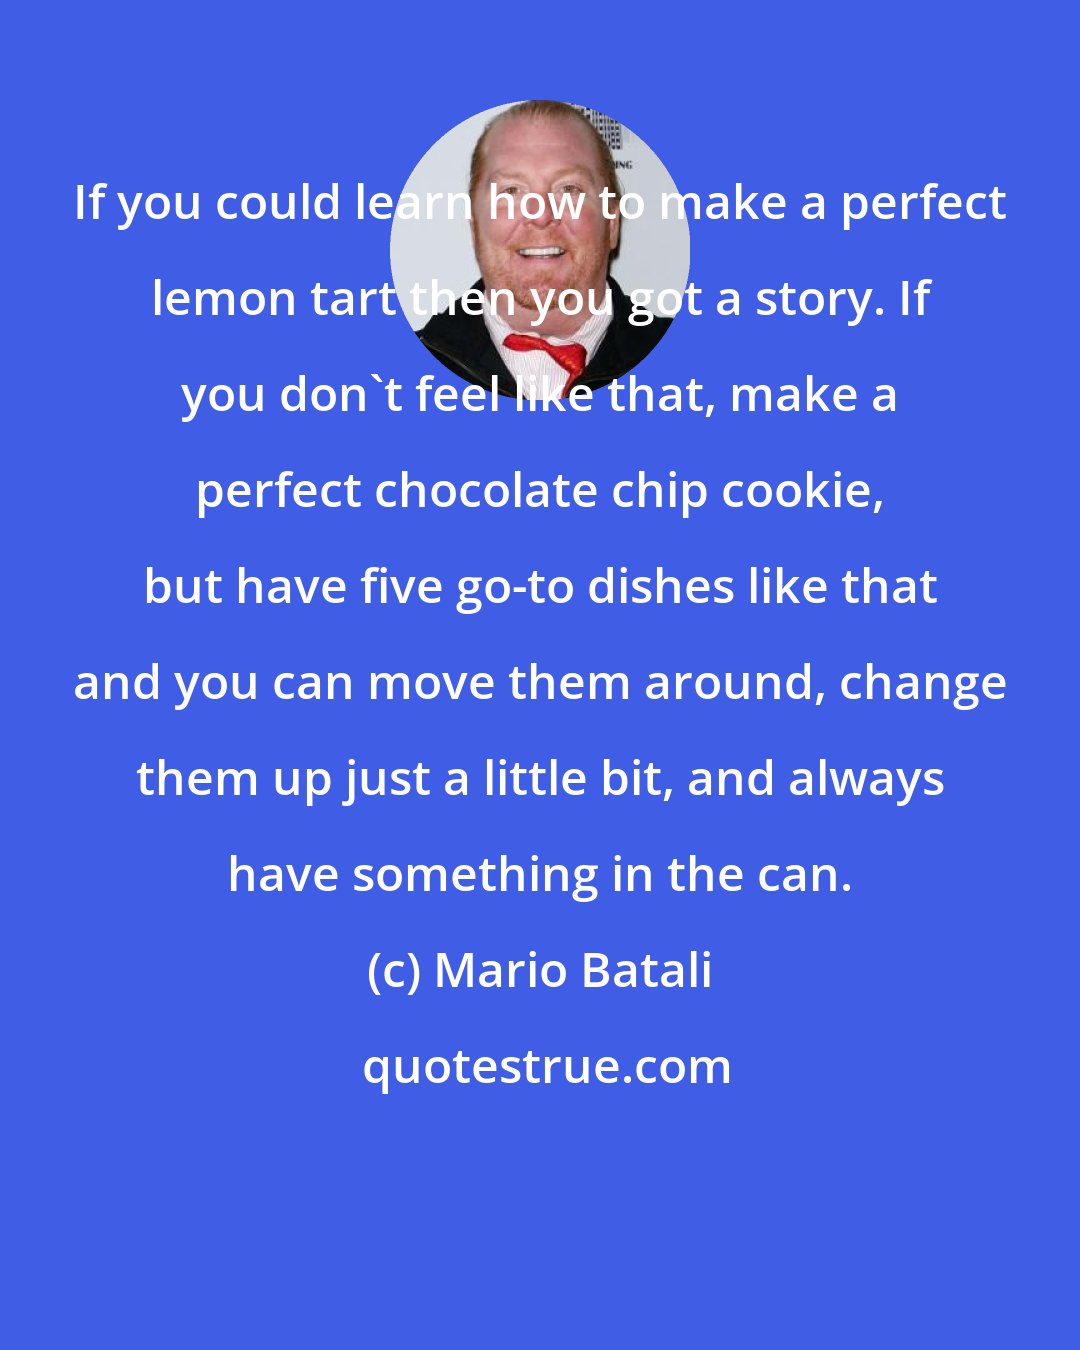 Mario Batali: If you could learn how to make a perfect lemon tart then you got a story. If you don't feel like that, make a perfect chocolate chip cookie, but have five go-to dishes like that and you can move them around, change them up just a little bit, and always have something in the can.